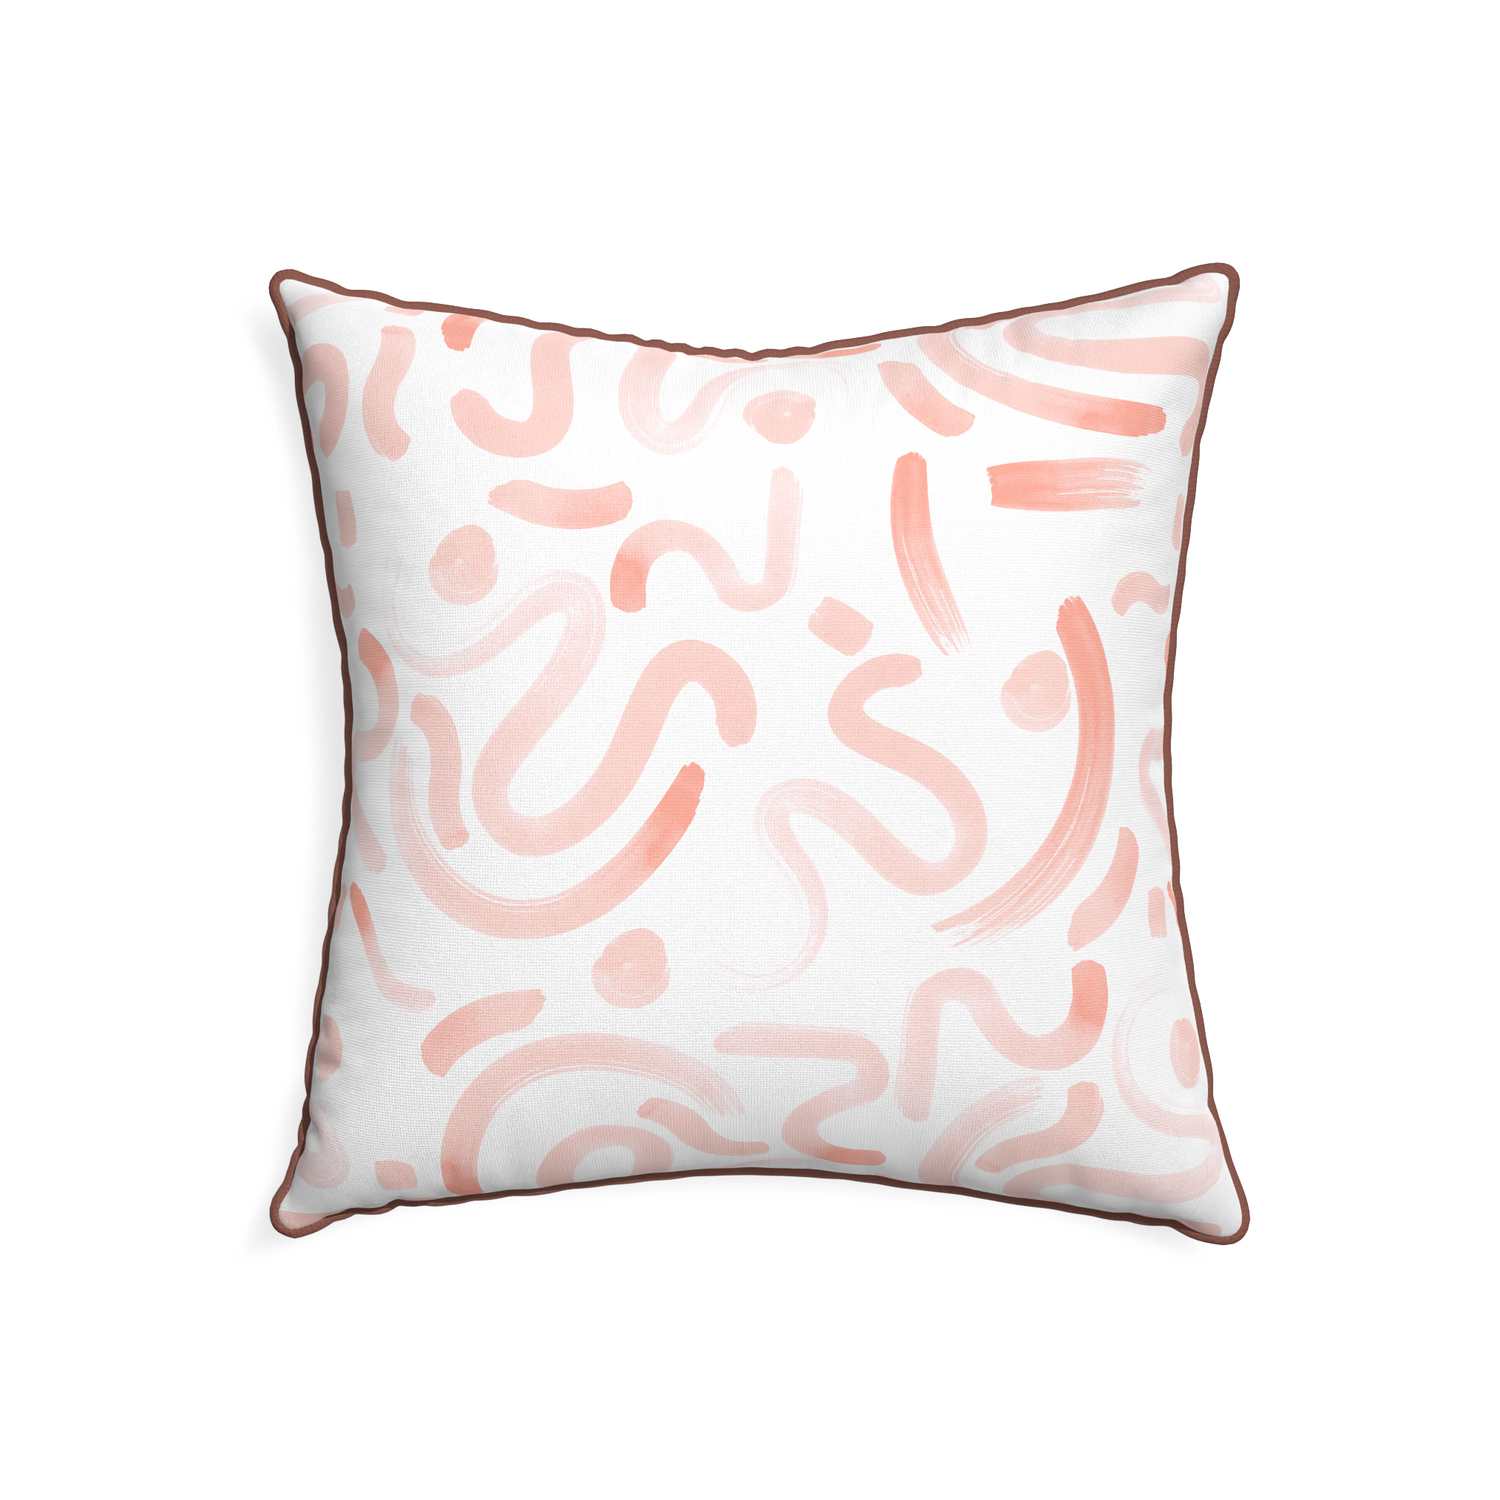 22-square hockney pink custom pillow with w piping on white background